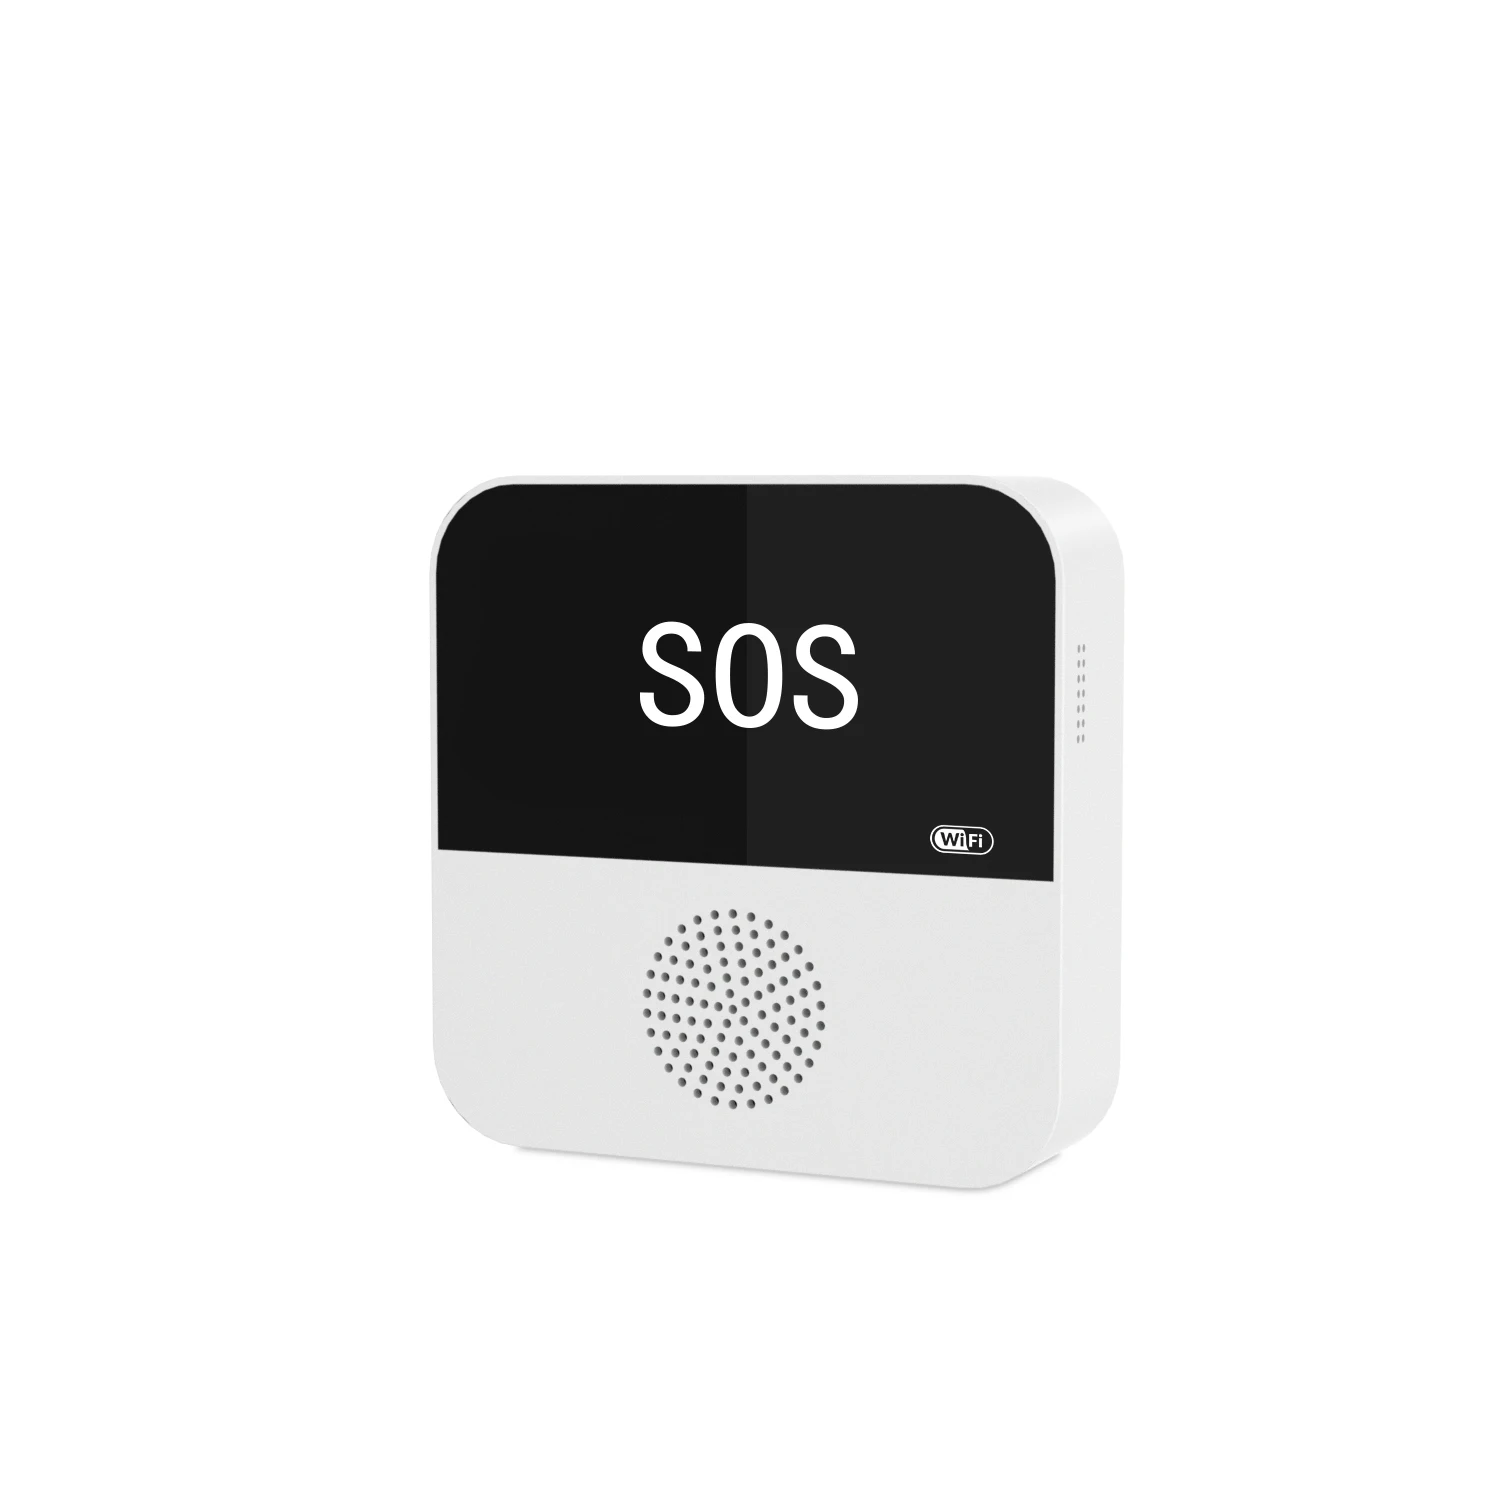 TUYA wi-fi wireless smart keyboard SOS call emergency call button medical alarm system for the elderly patients with alarm enlarge